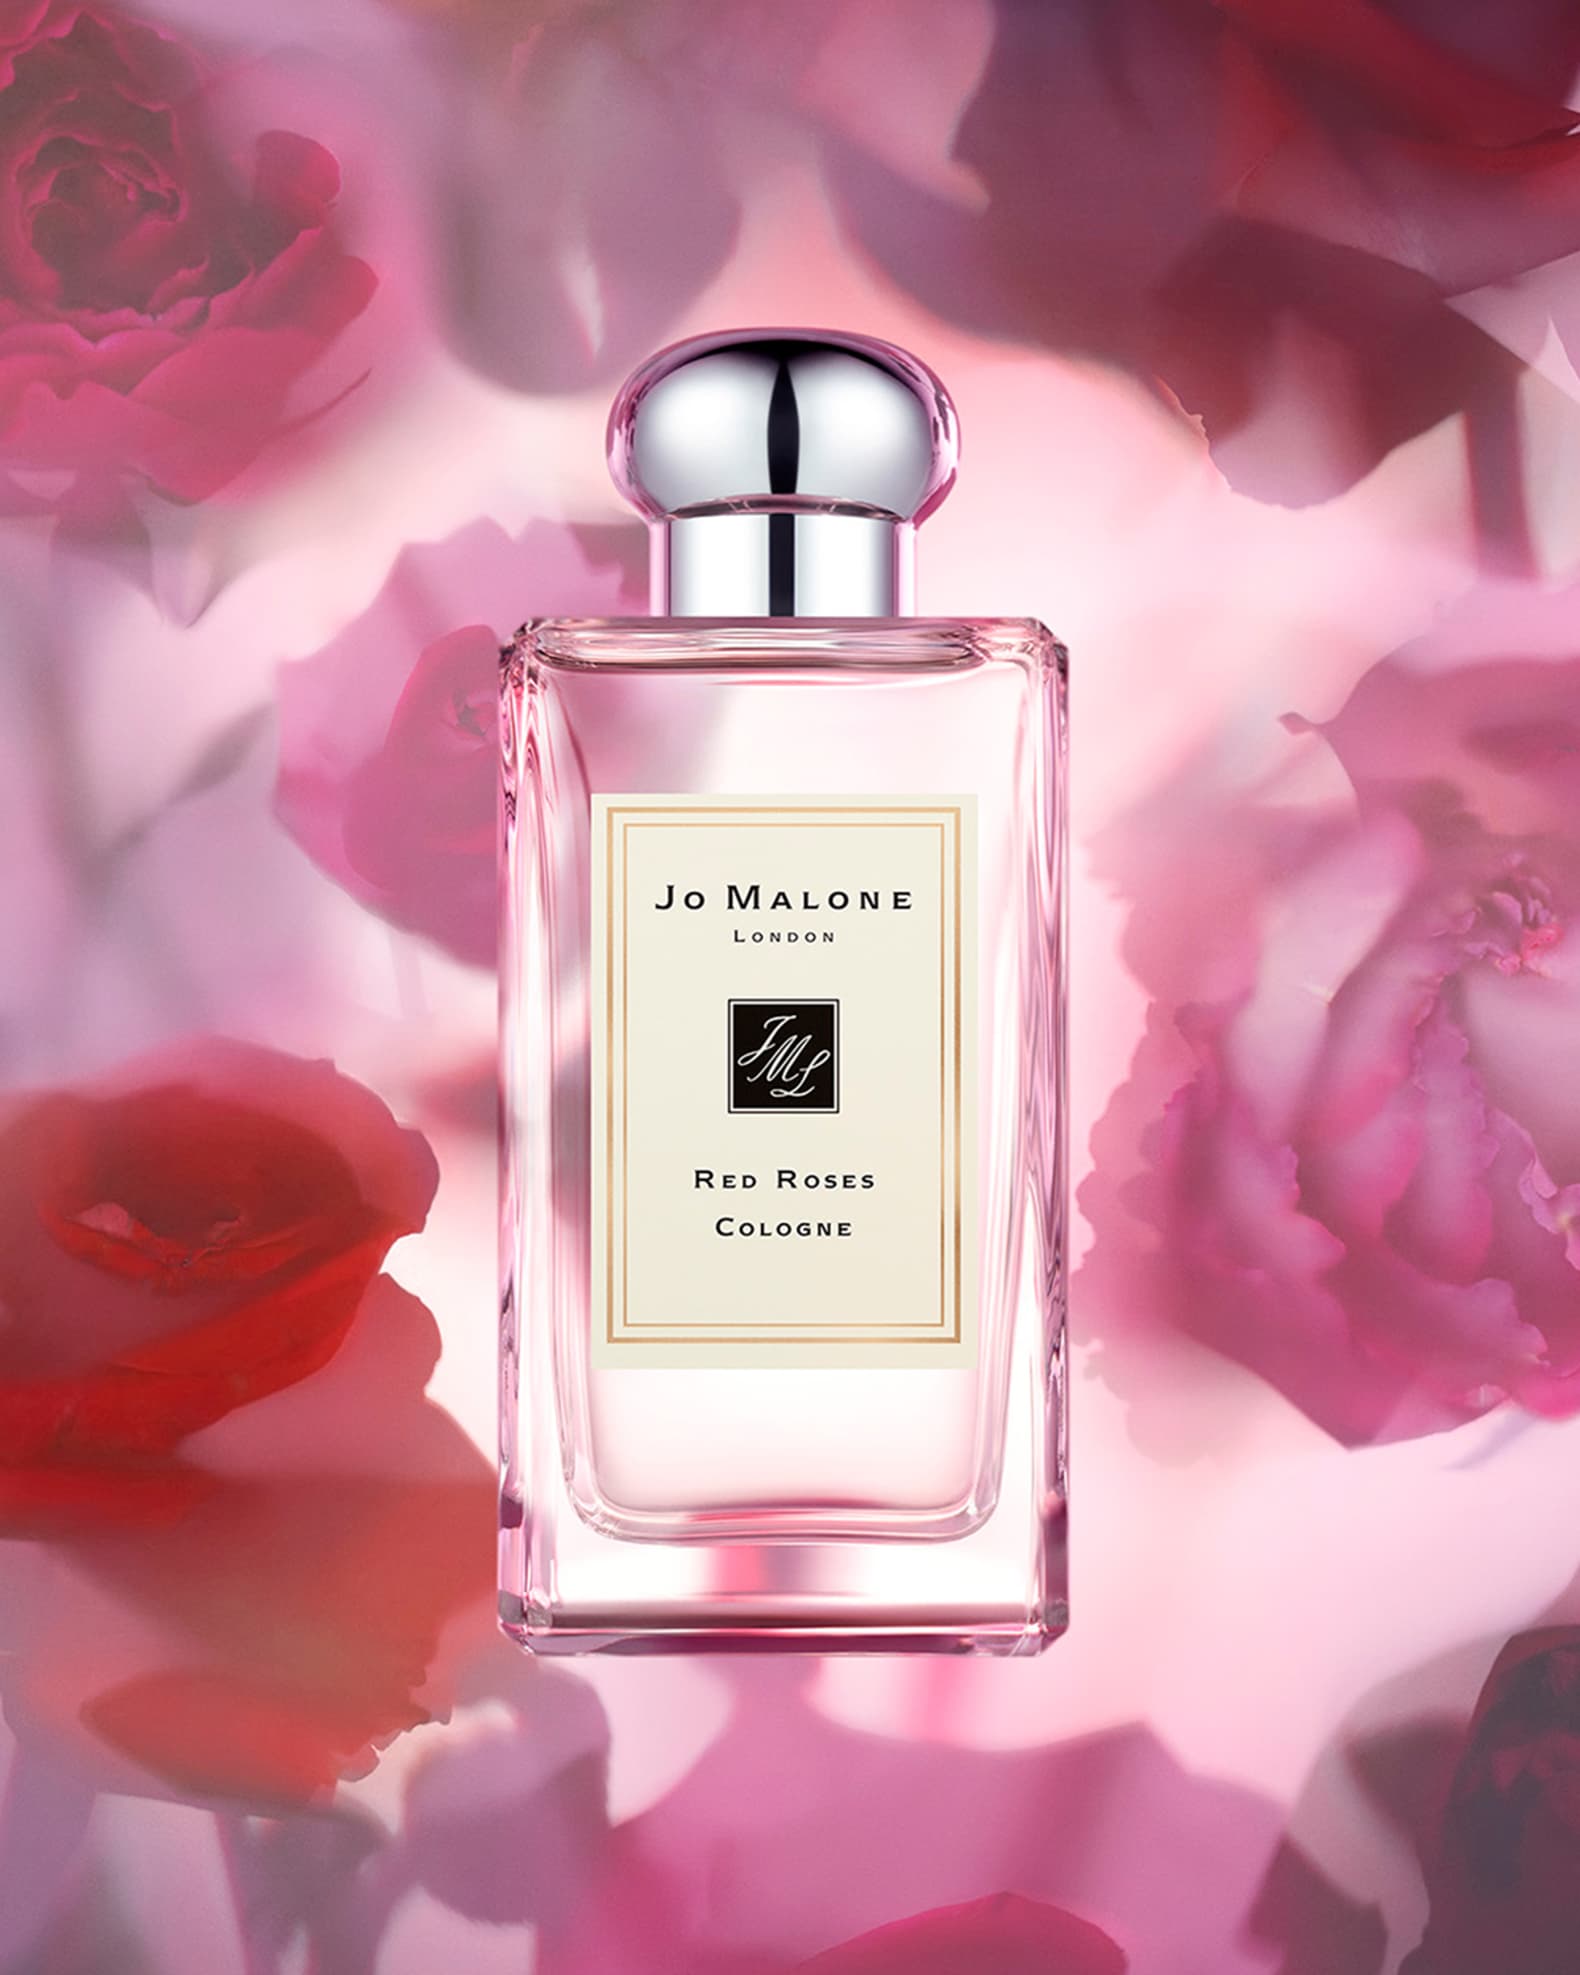 Jo Malone London Red Roses Cologne, 3.4 oz. | Neiman Marcus